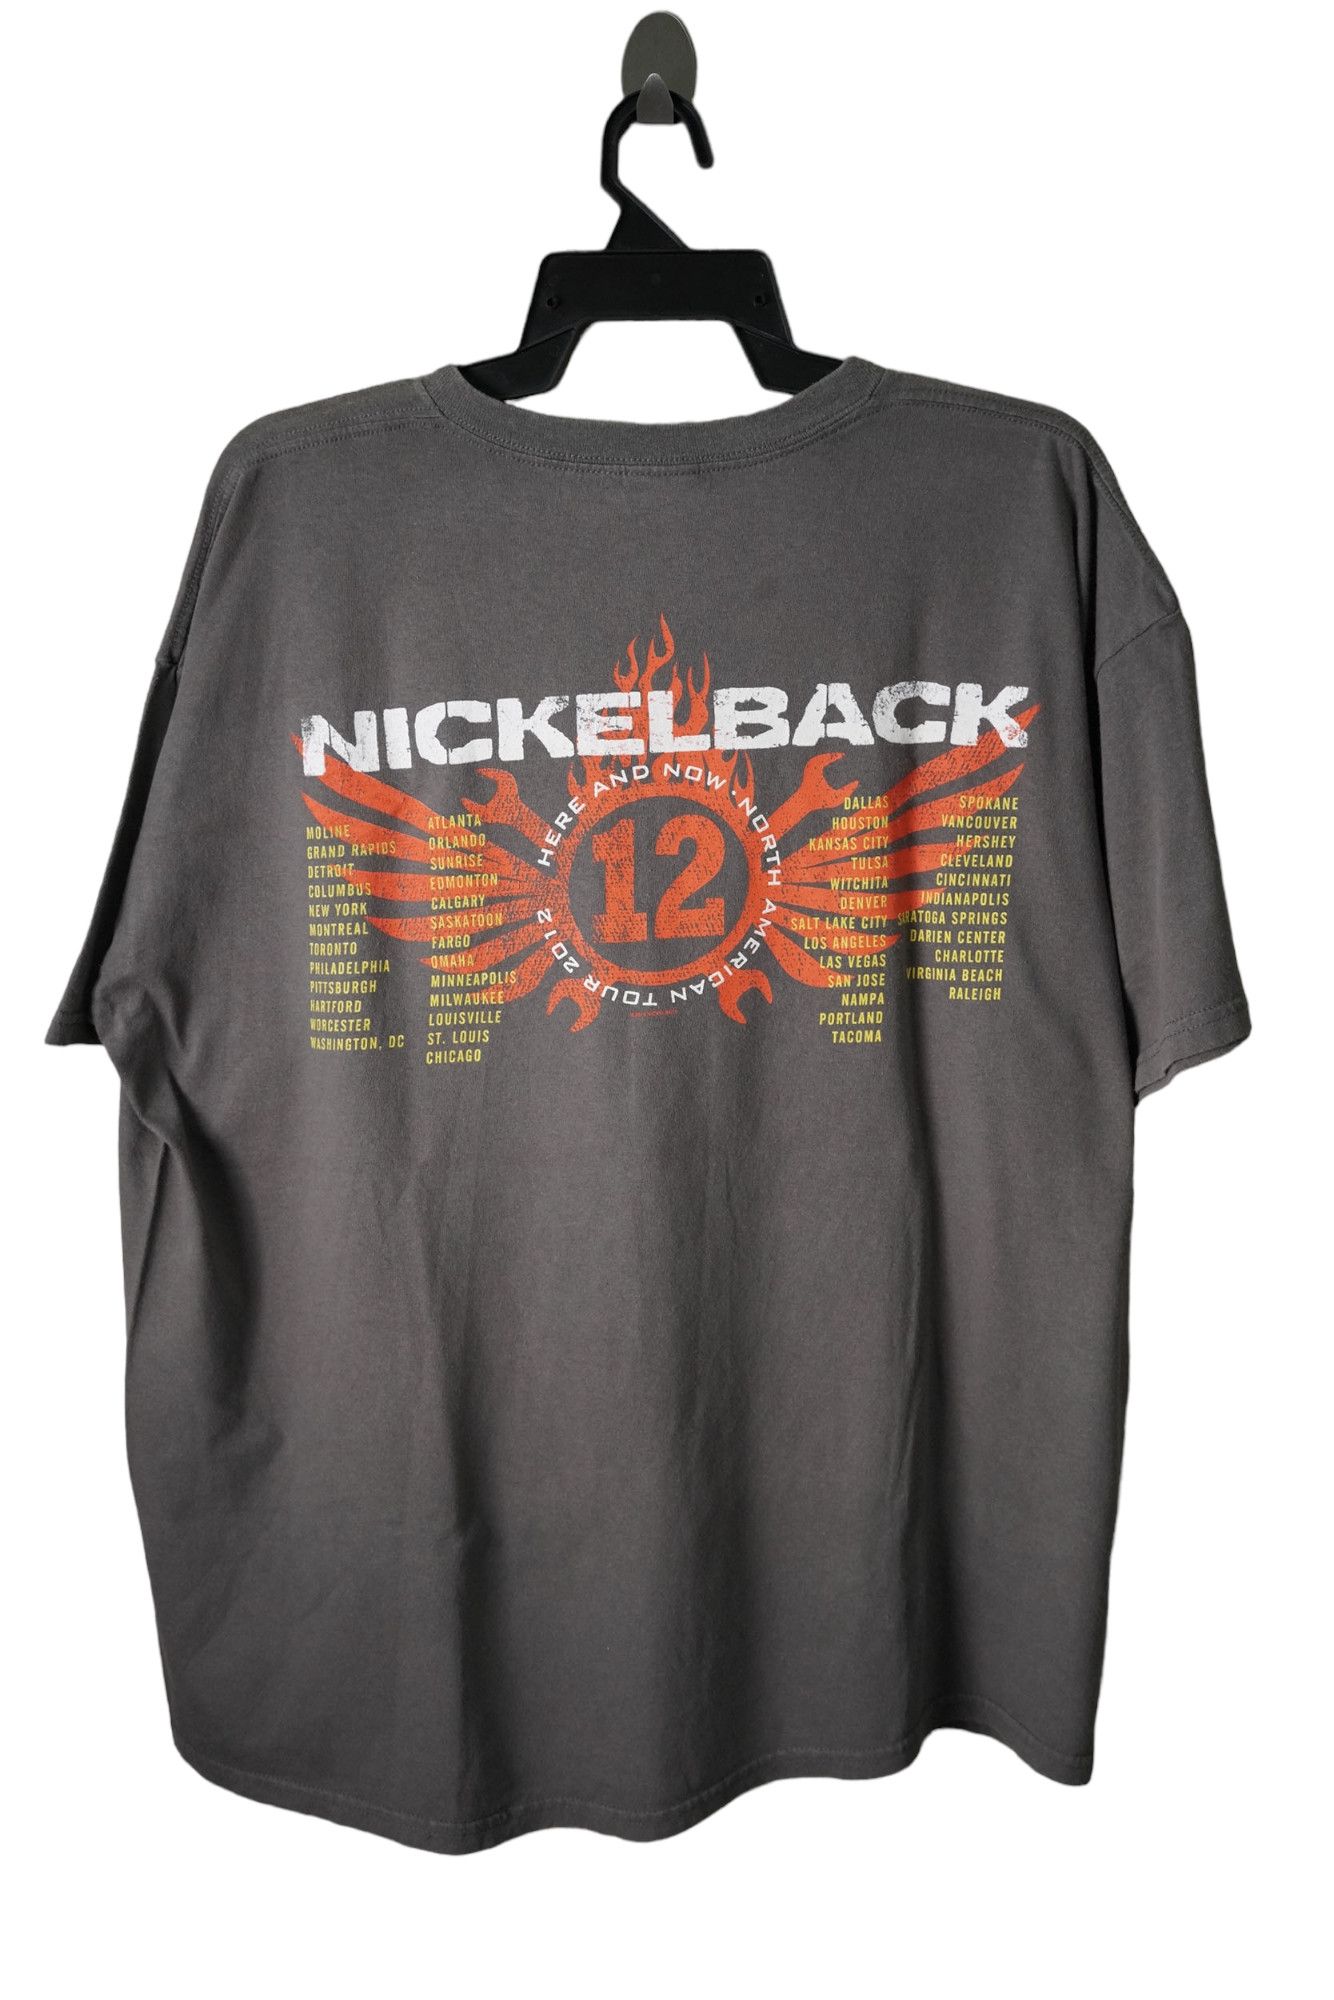 Tour Tee Nickelback Here and Now North American Tour 2012 Size US XL / EU 56 / 4 - 4 Thumbnail